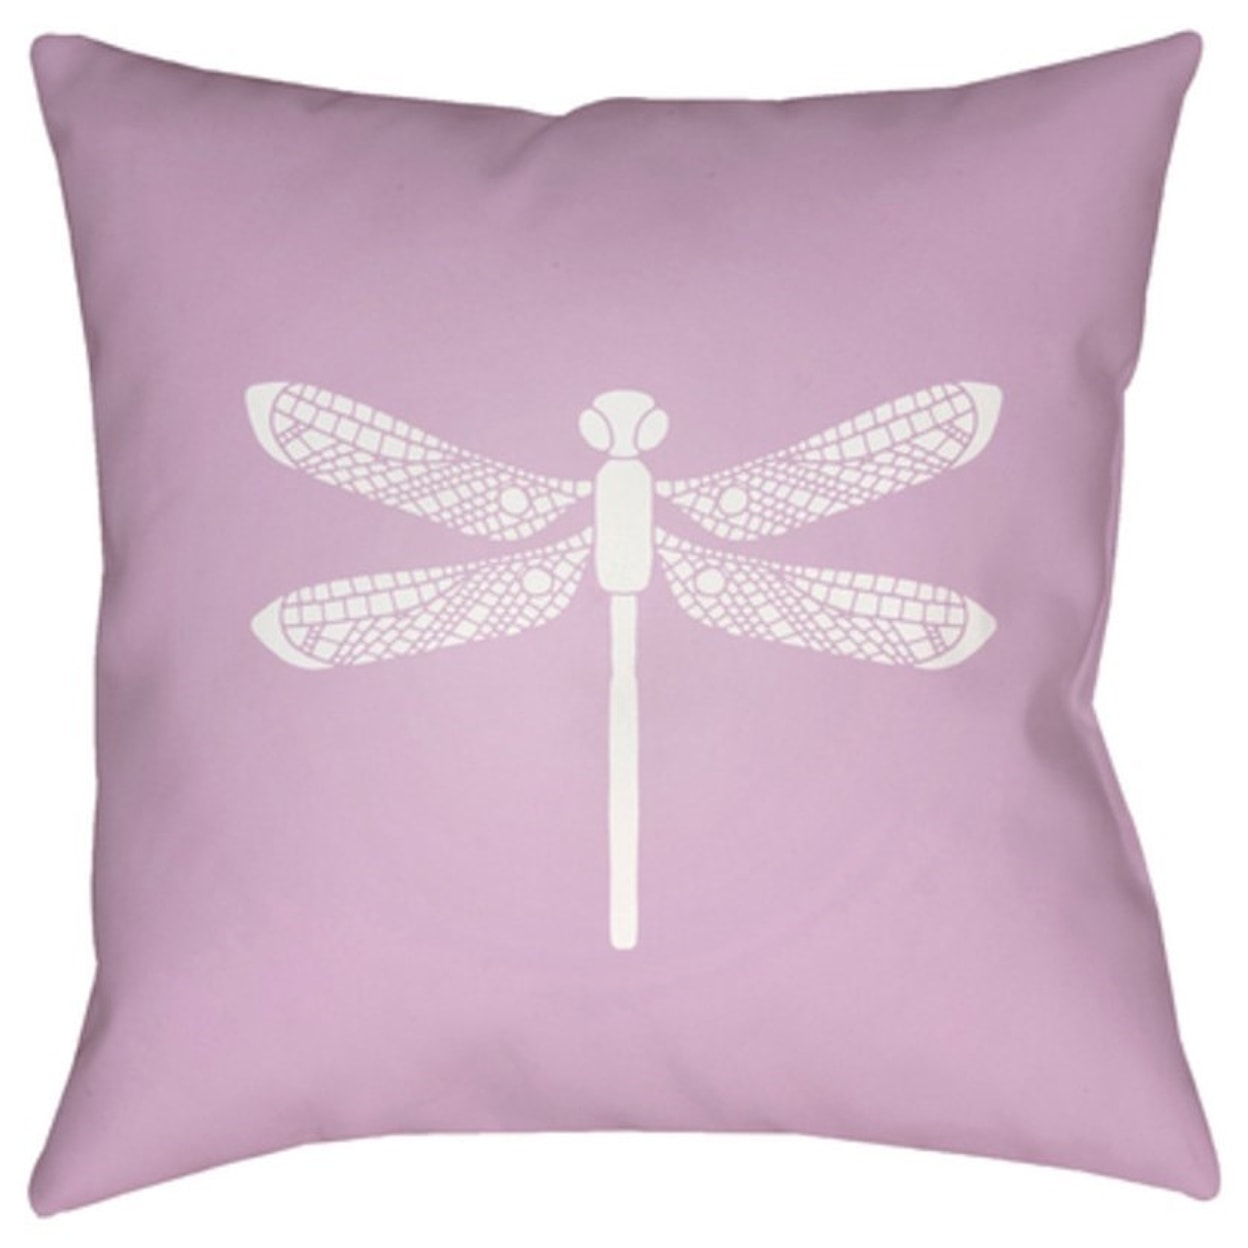 Surya Dragonfly Pillow